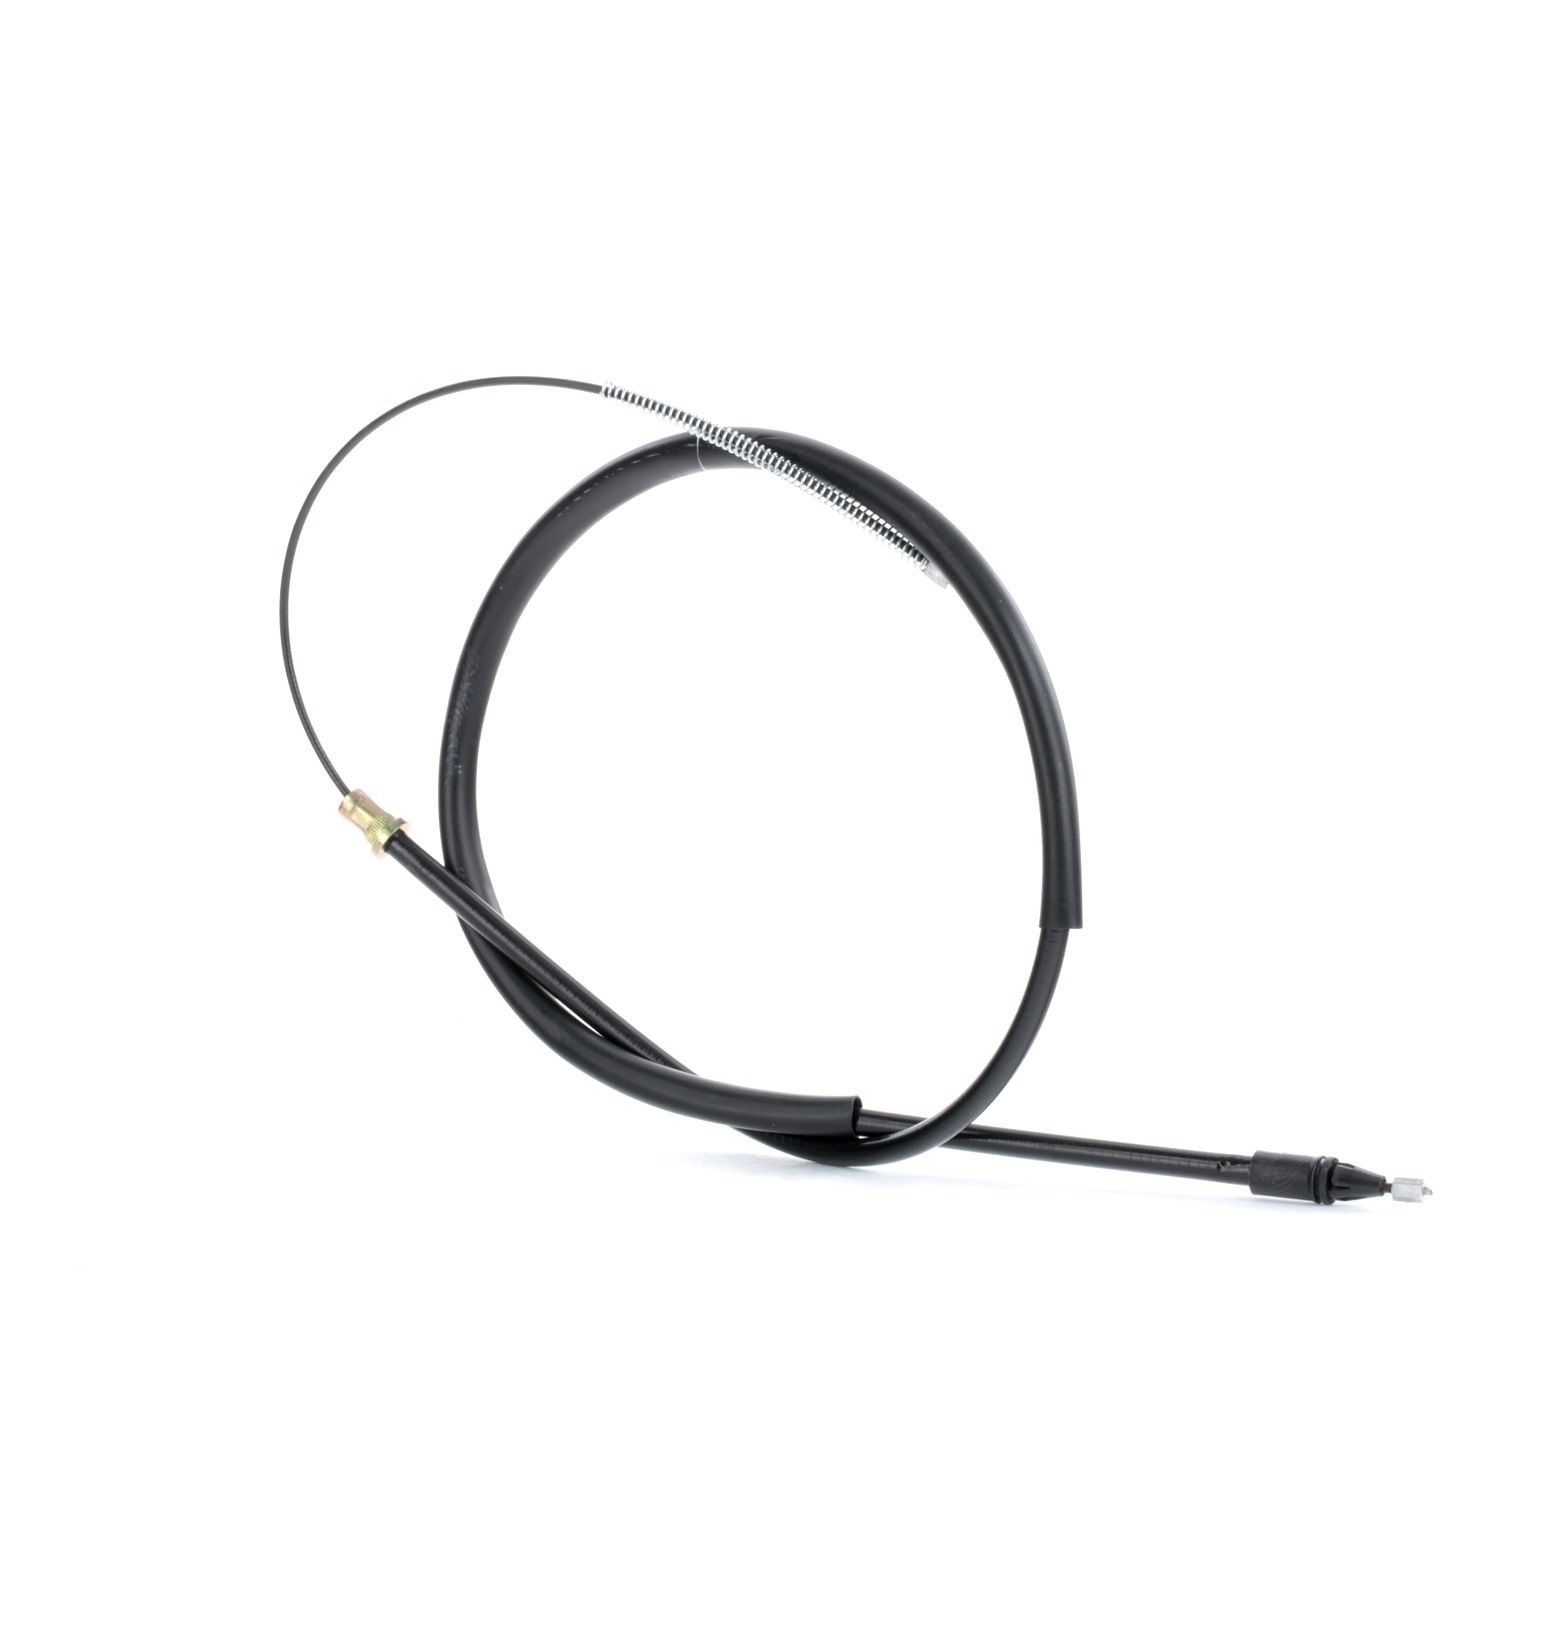 RIDEX 124C0189 Hand brake cable Left Rear, Right Rear, 1460, 1053mm, Disc/Drum